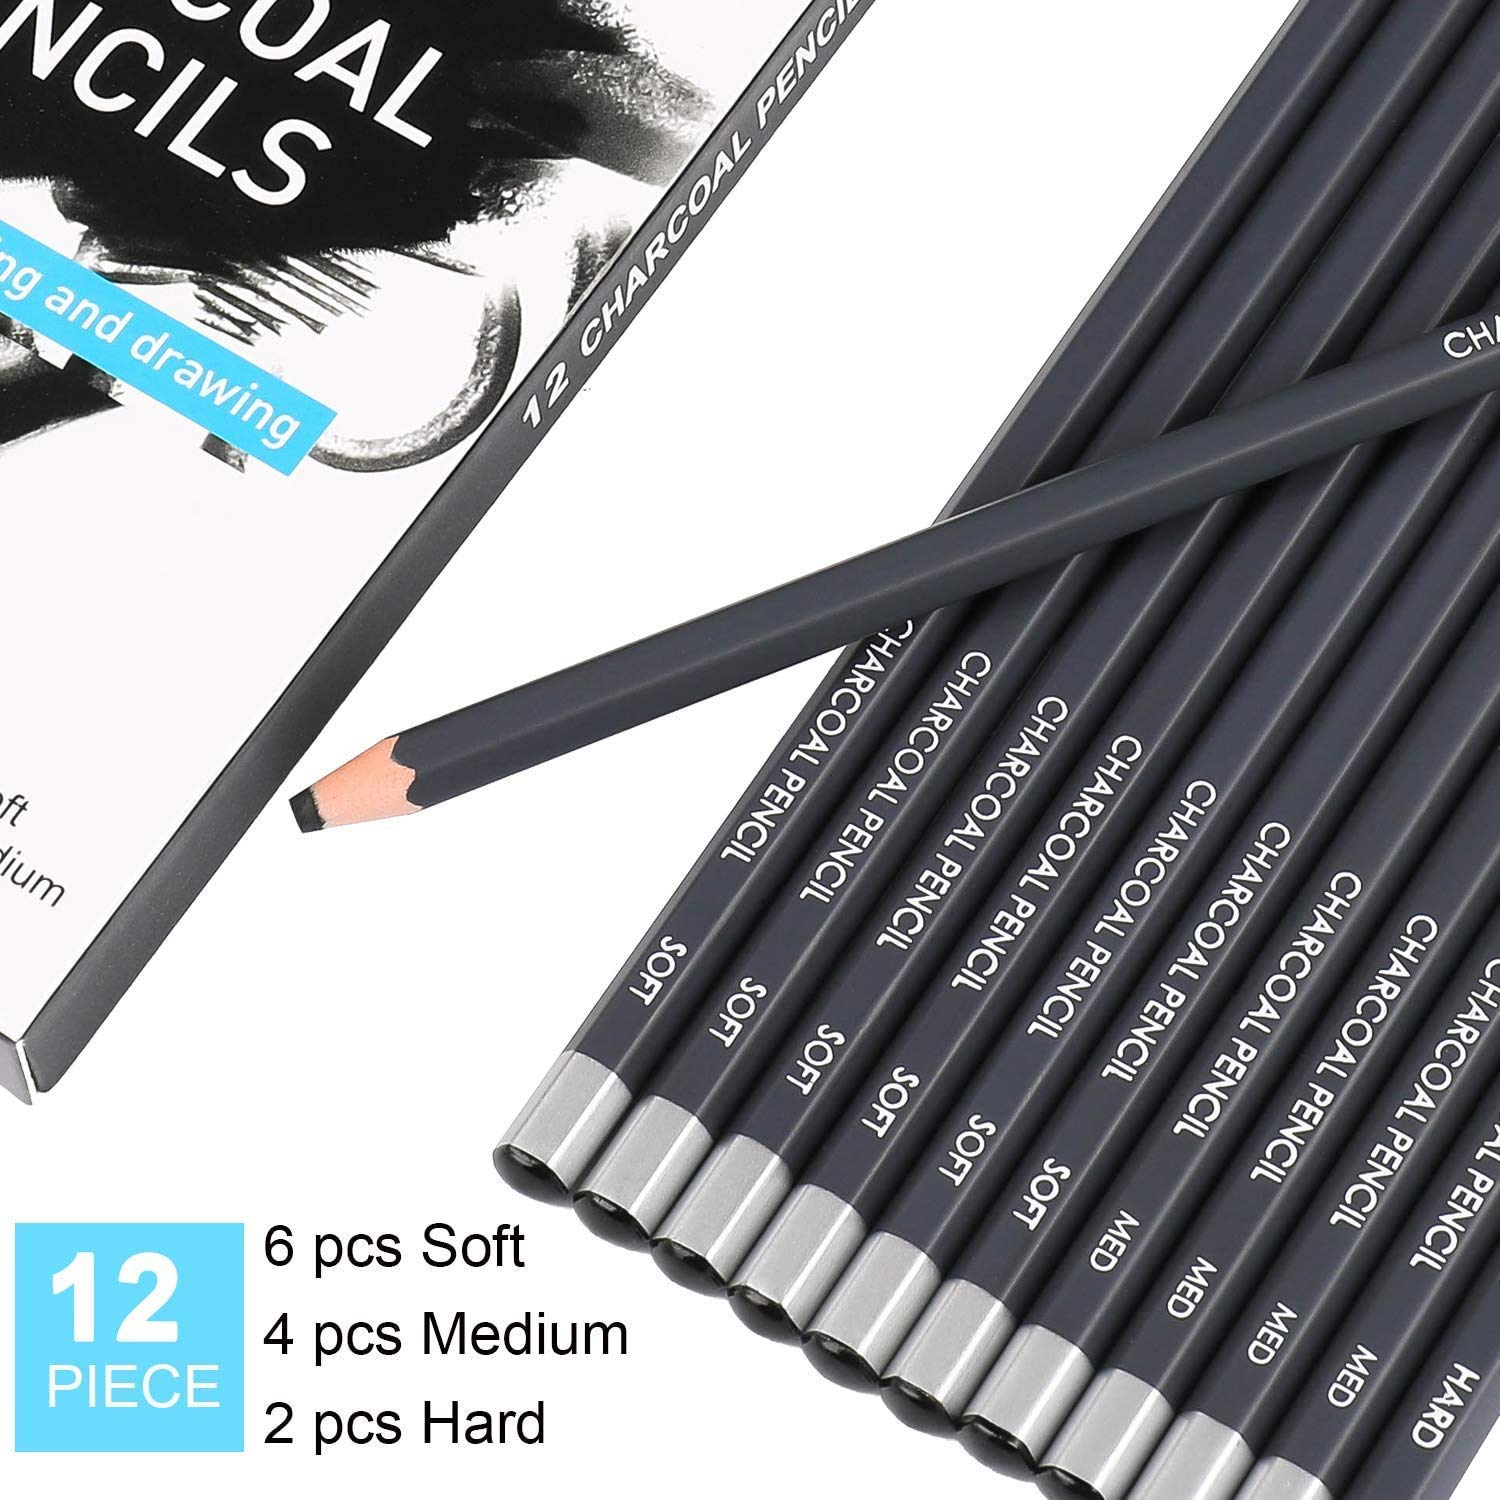 Pack of 3)White Charcoal Pencils for Expressive Portraits and